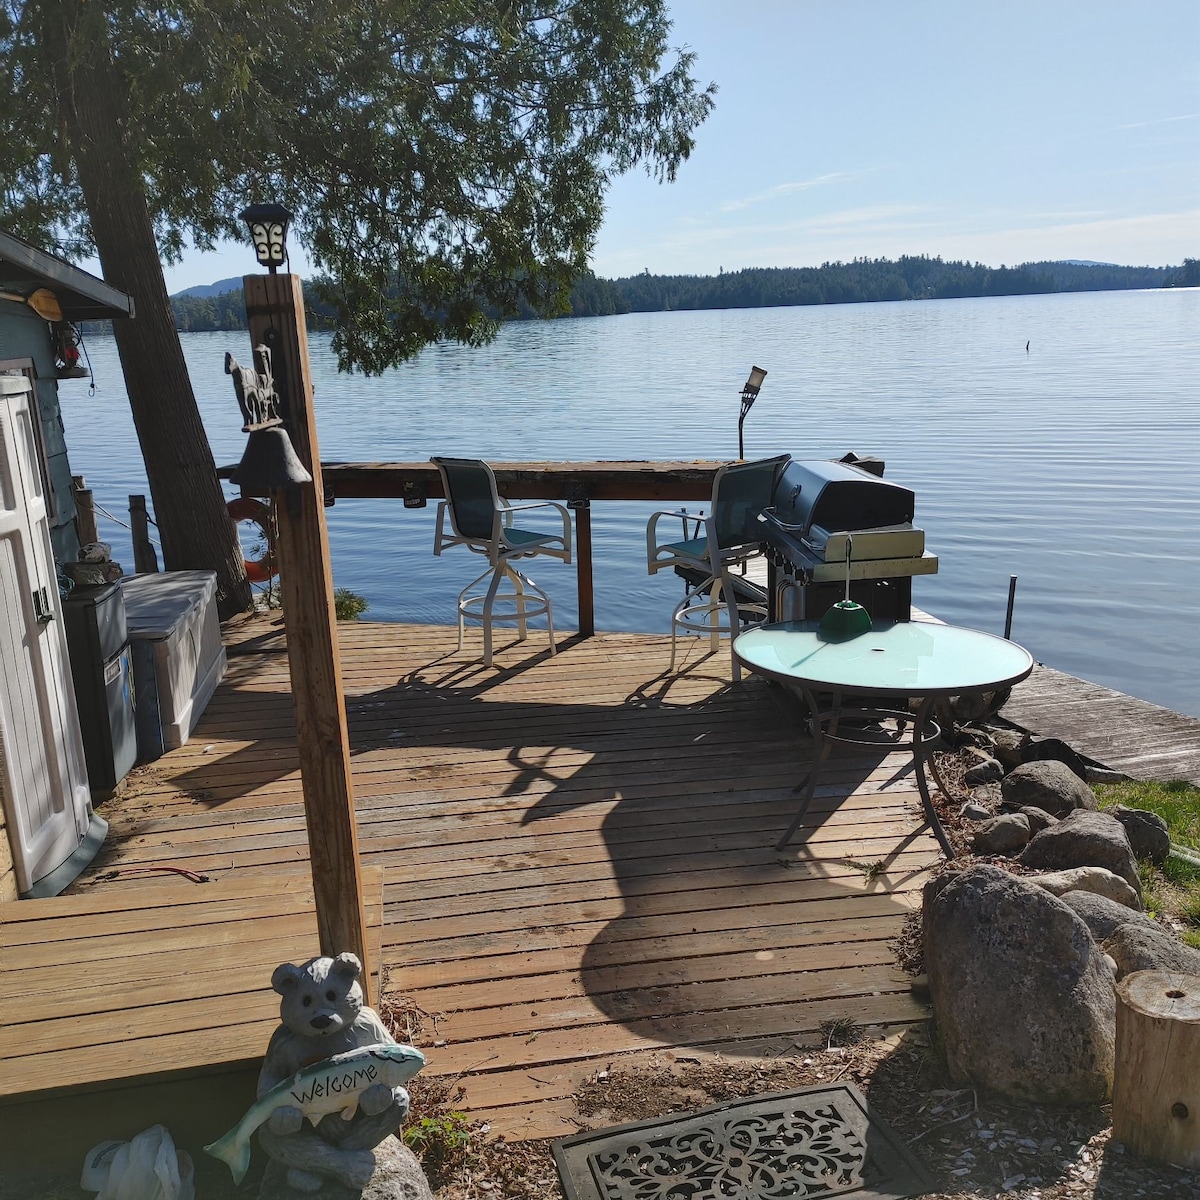 Lakefront Cabin "The Teahouse"